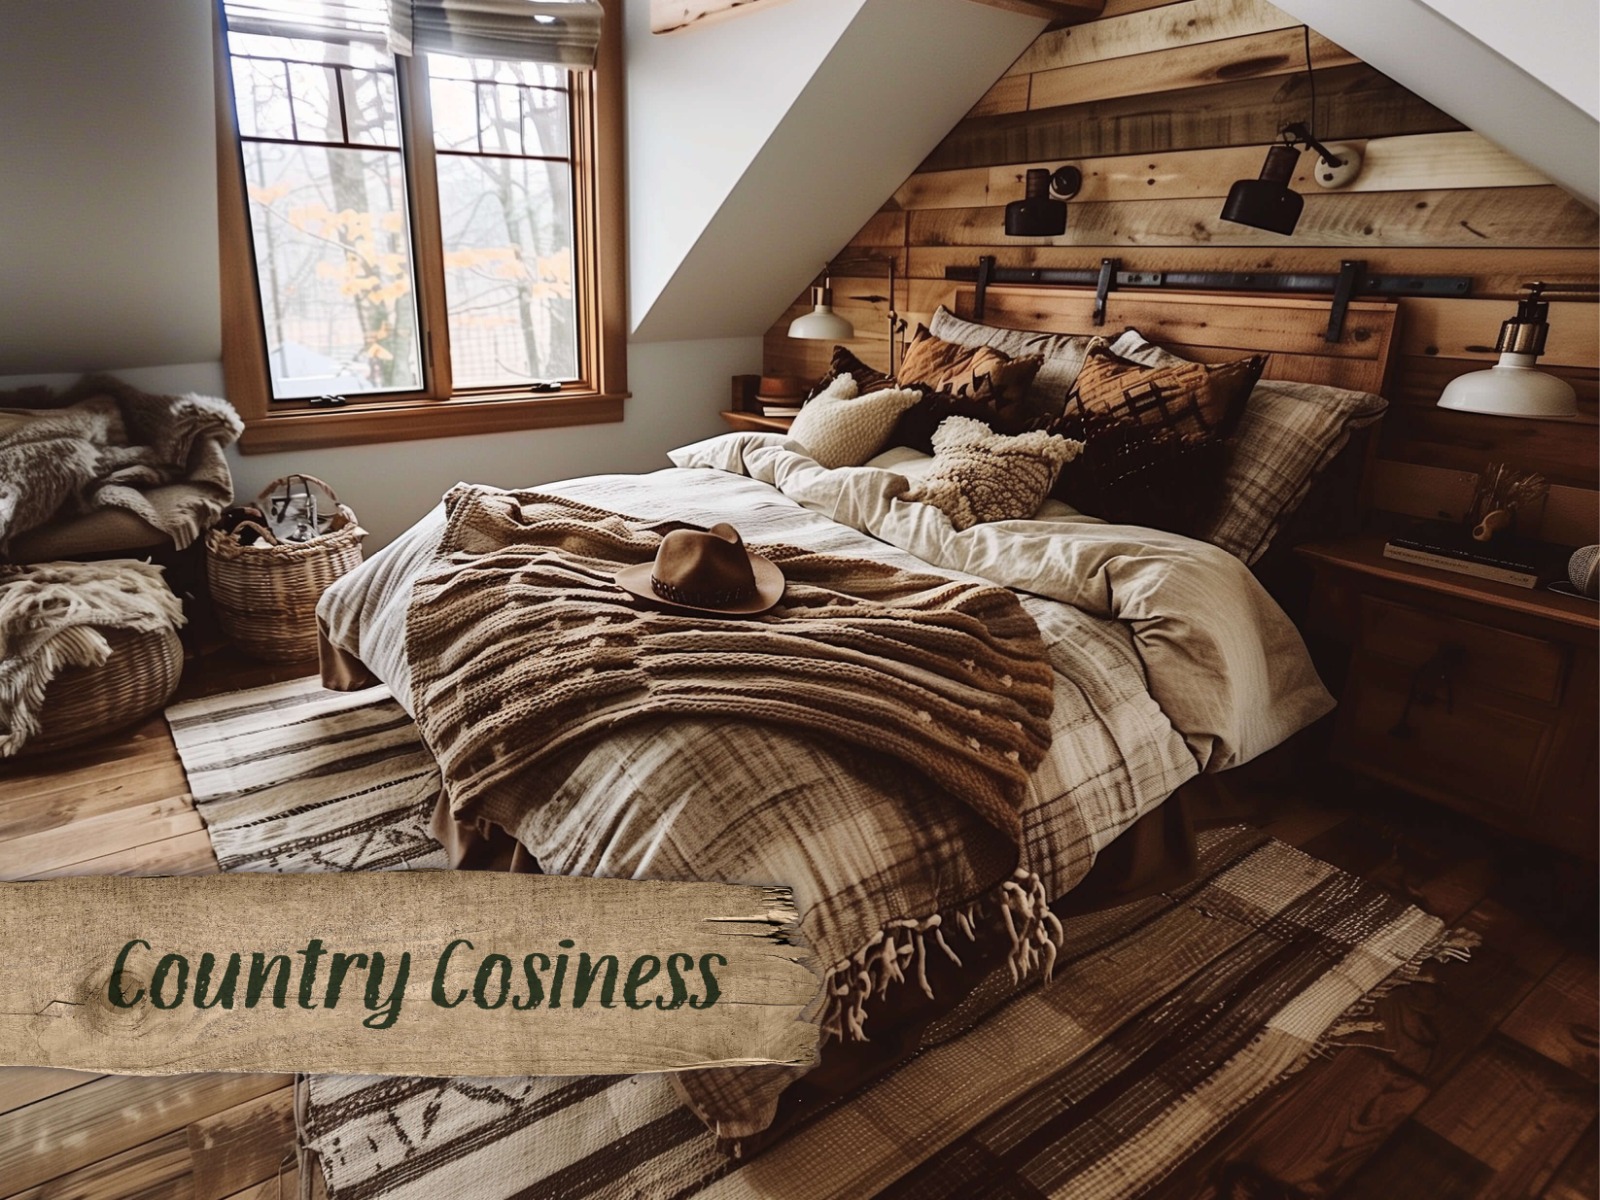 Country cosiness bedroom